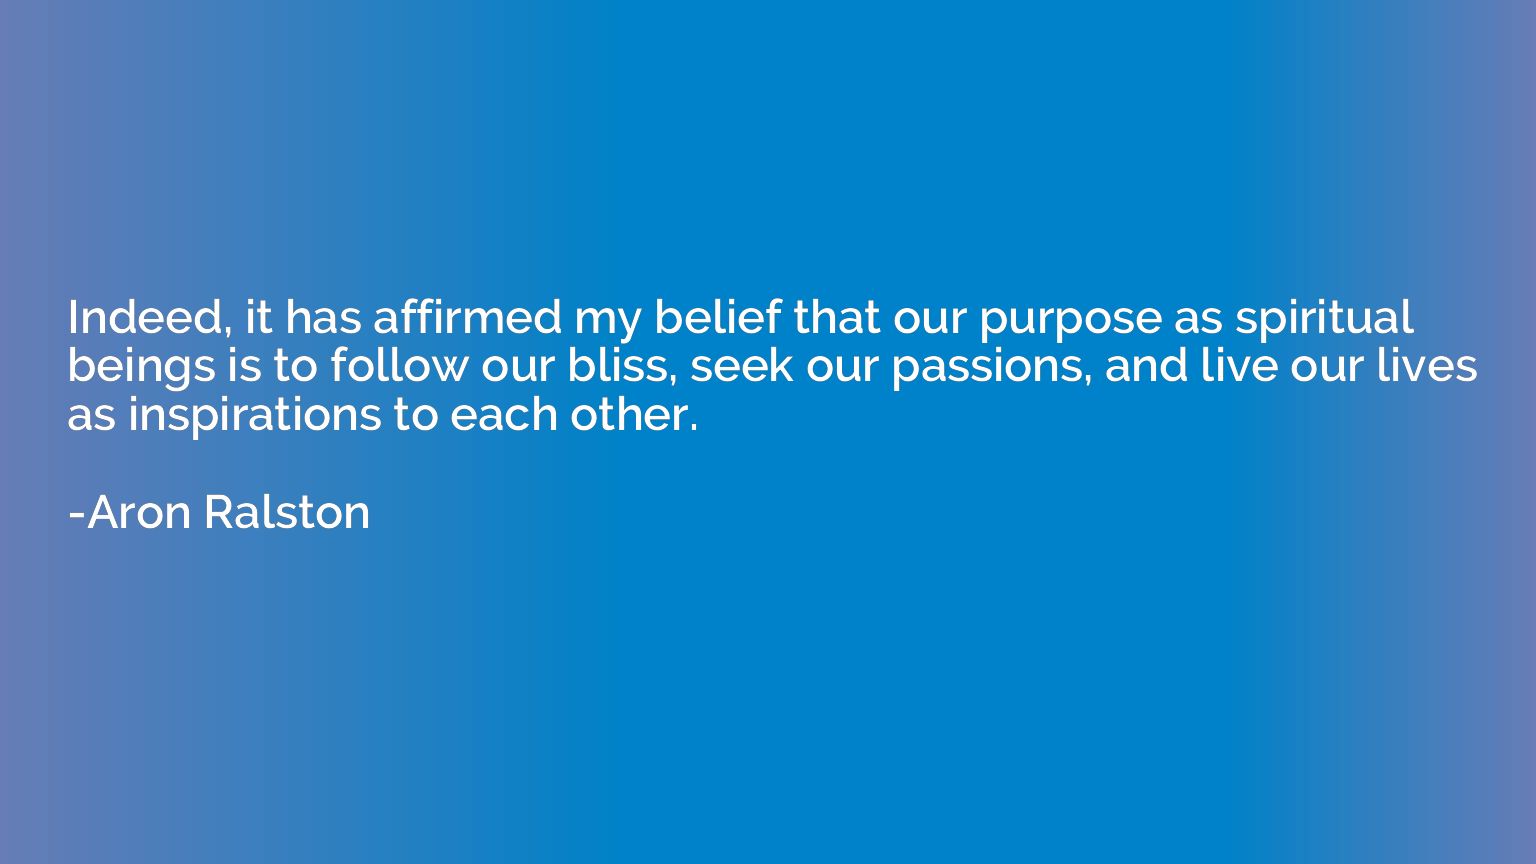 Indeed, it has affirmed my belief that our purpose as spirit